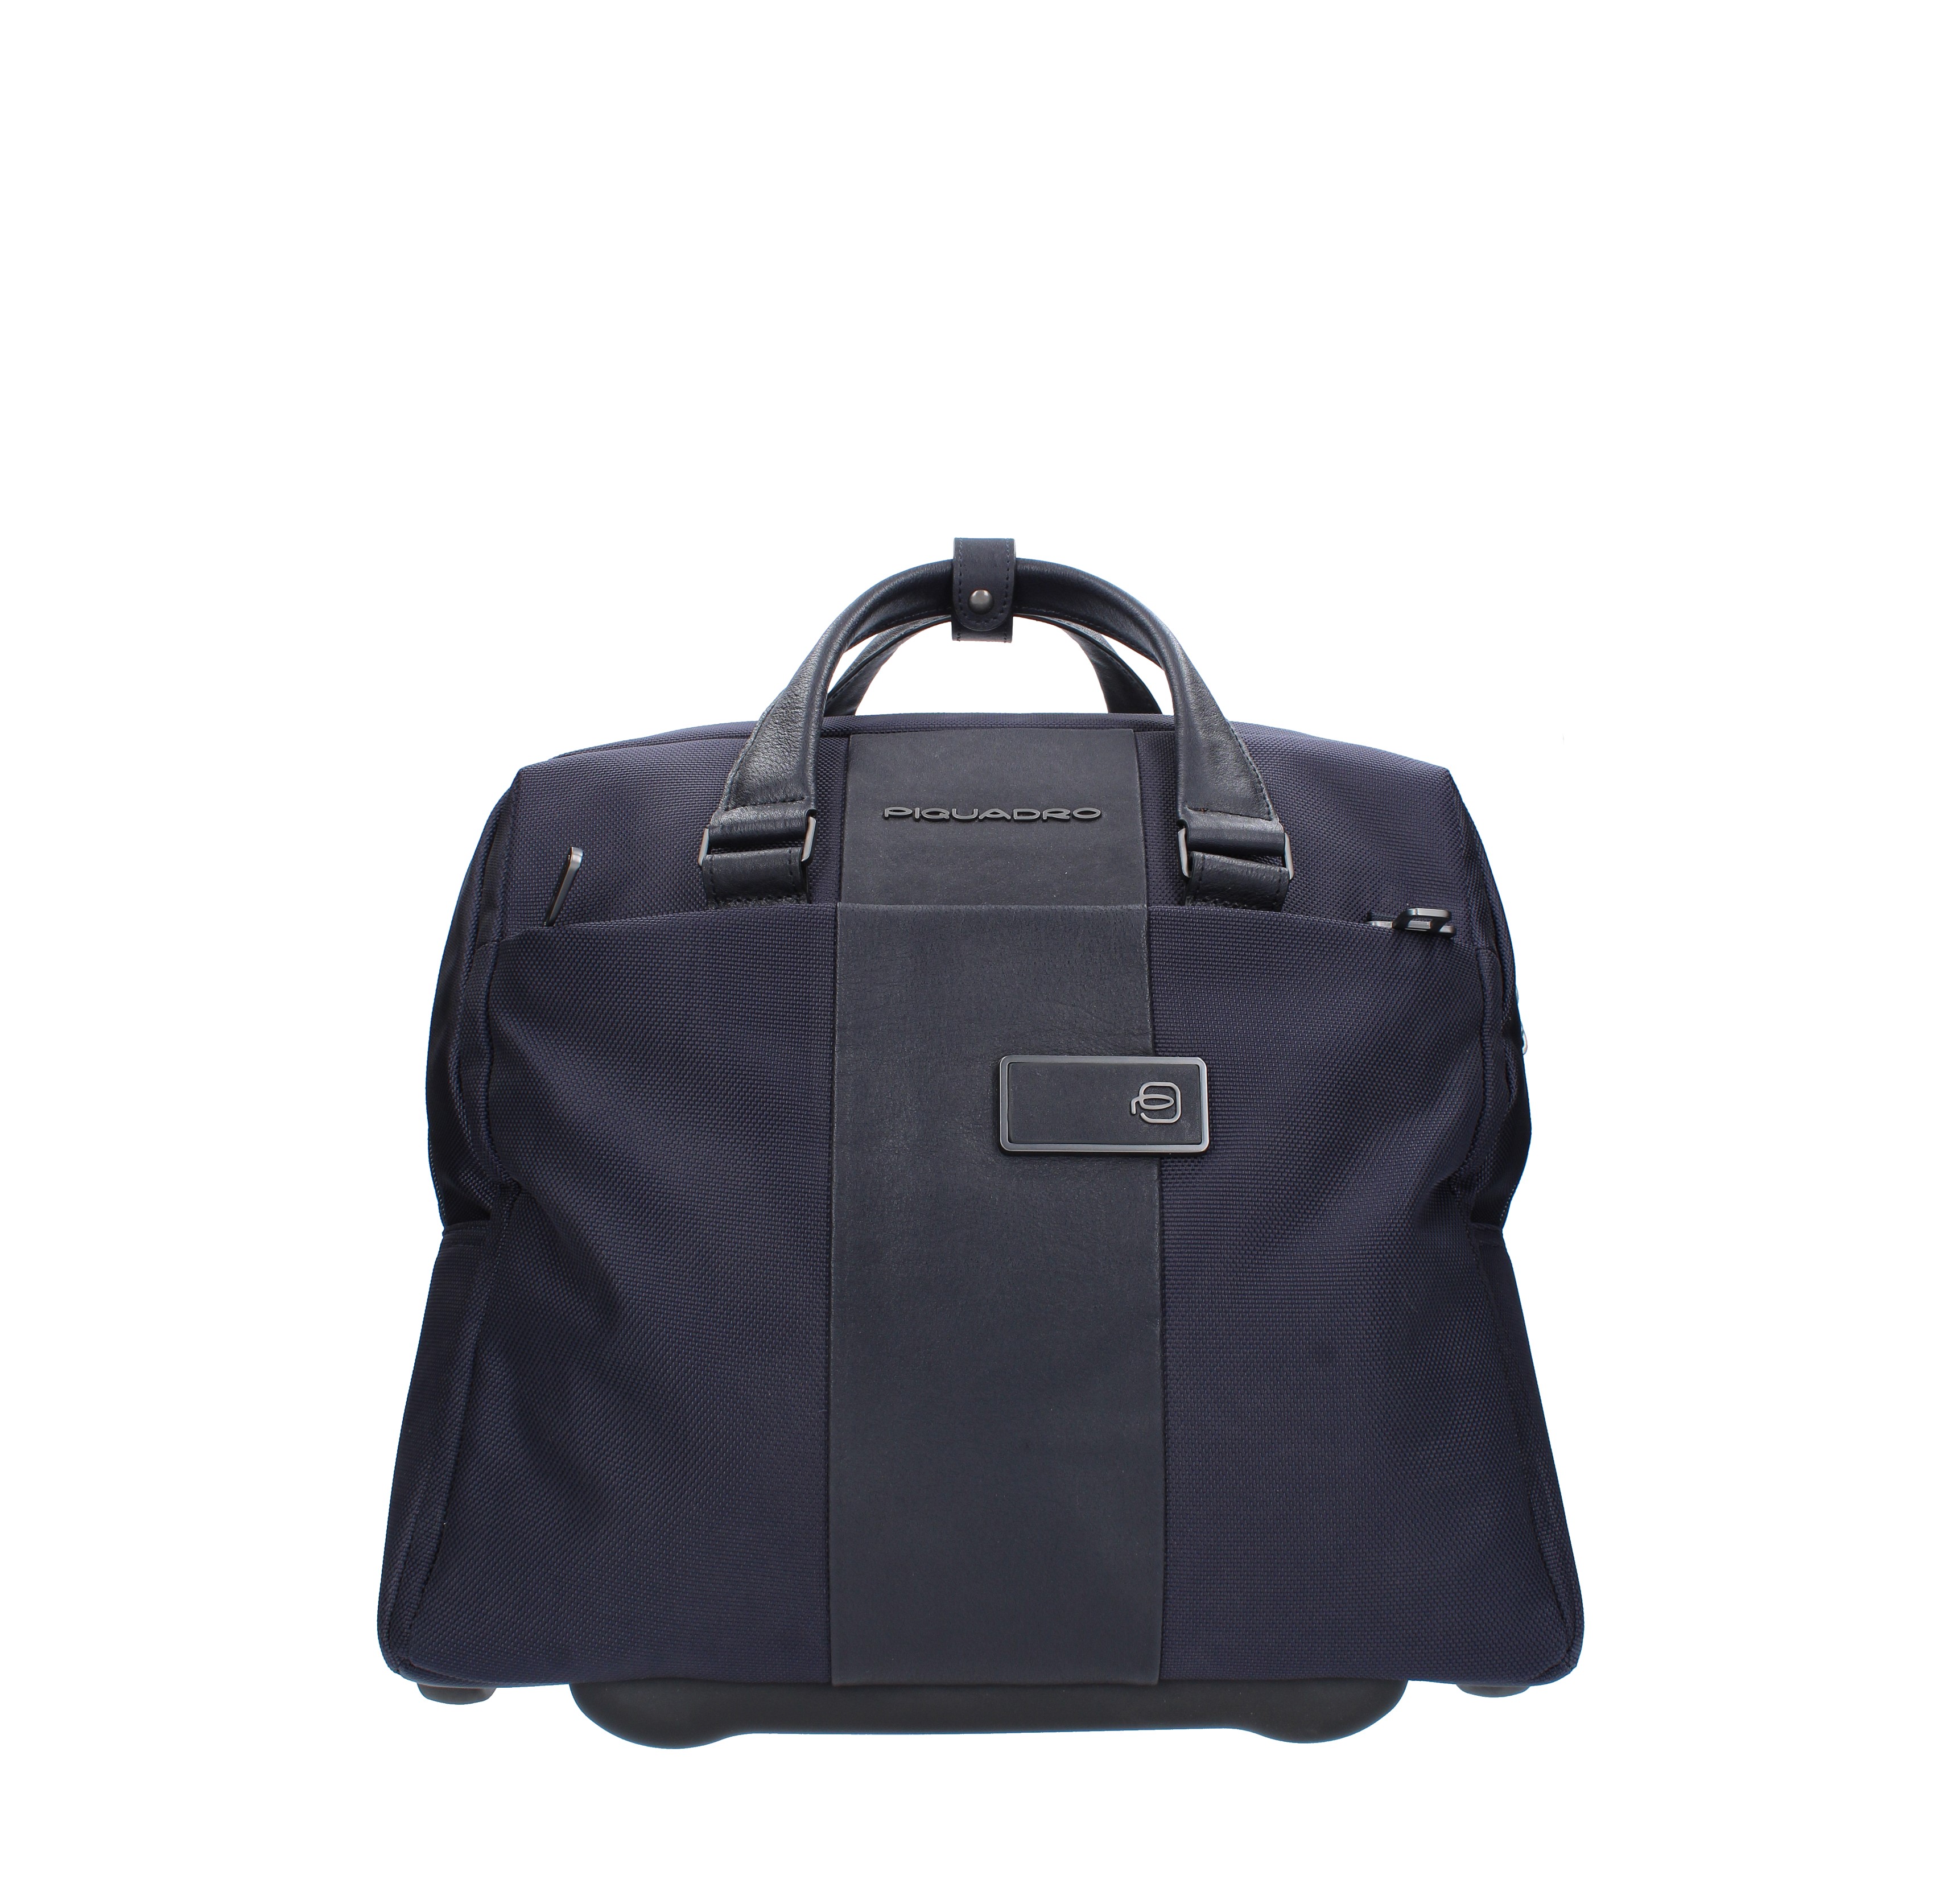 Piquadro trolley briefcase in leather and fabric - PIQUADRO - Ginevra  calzature